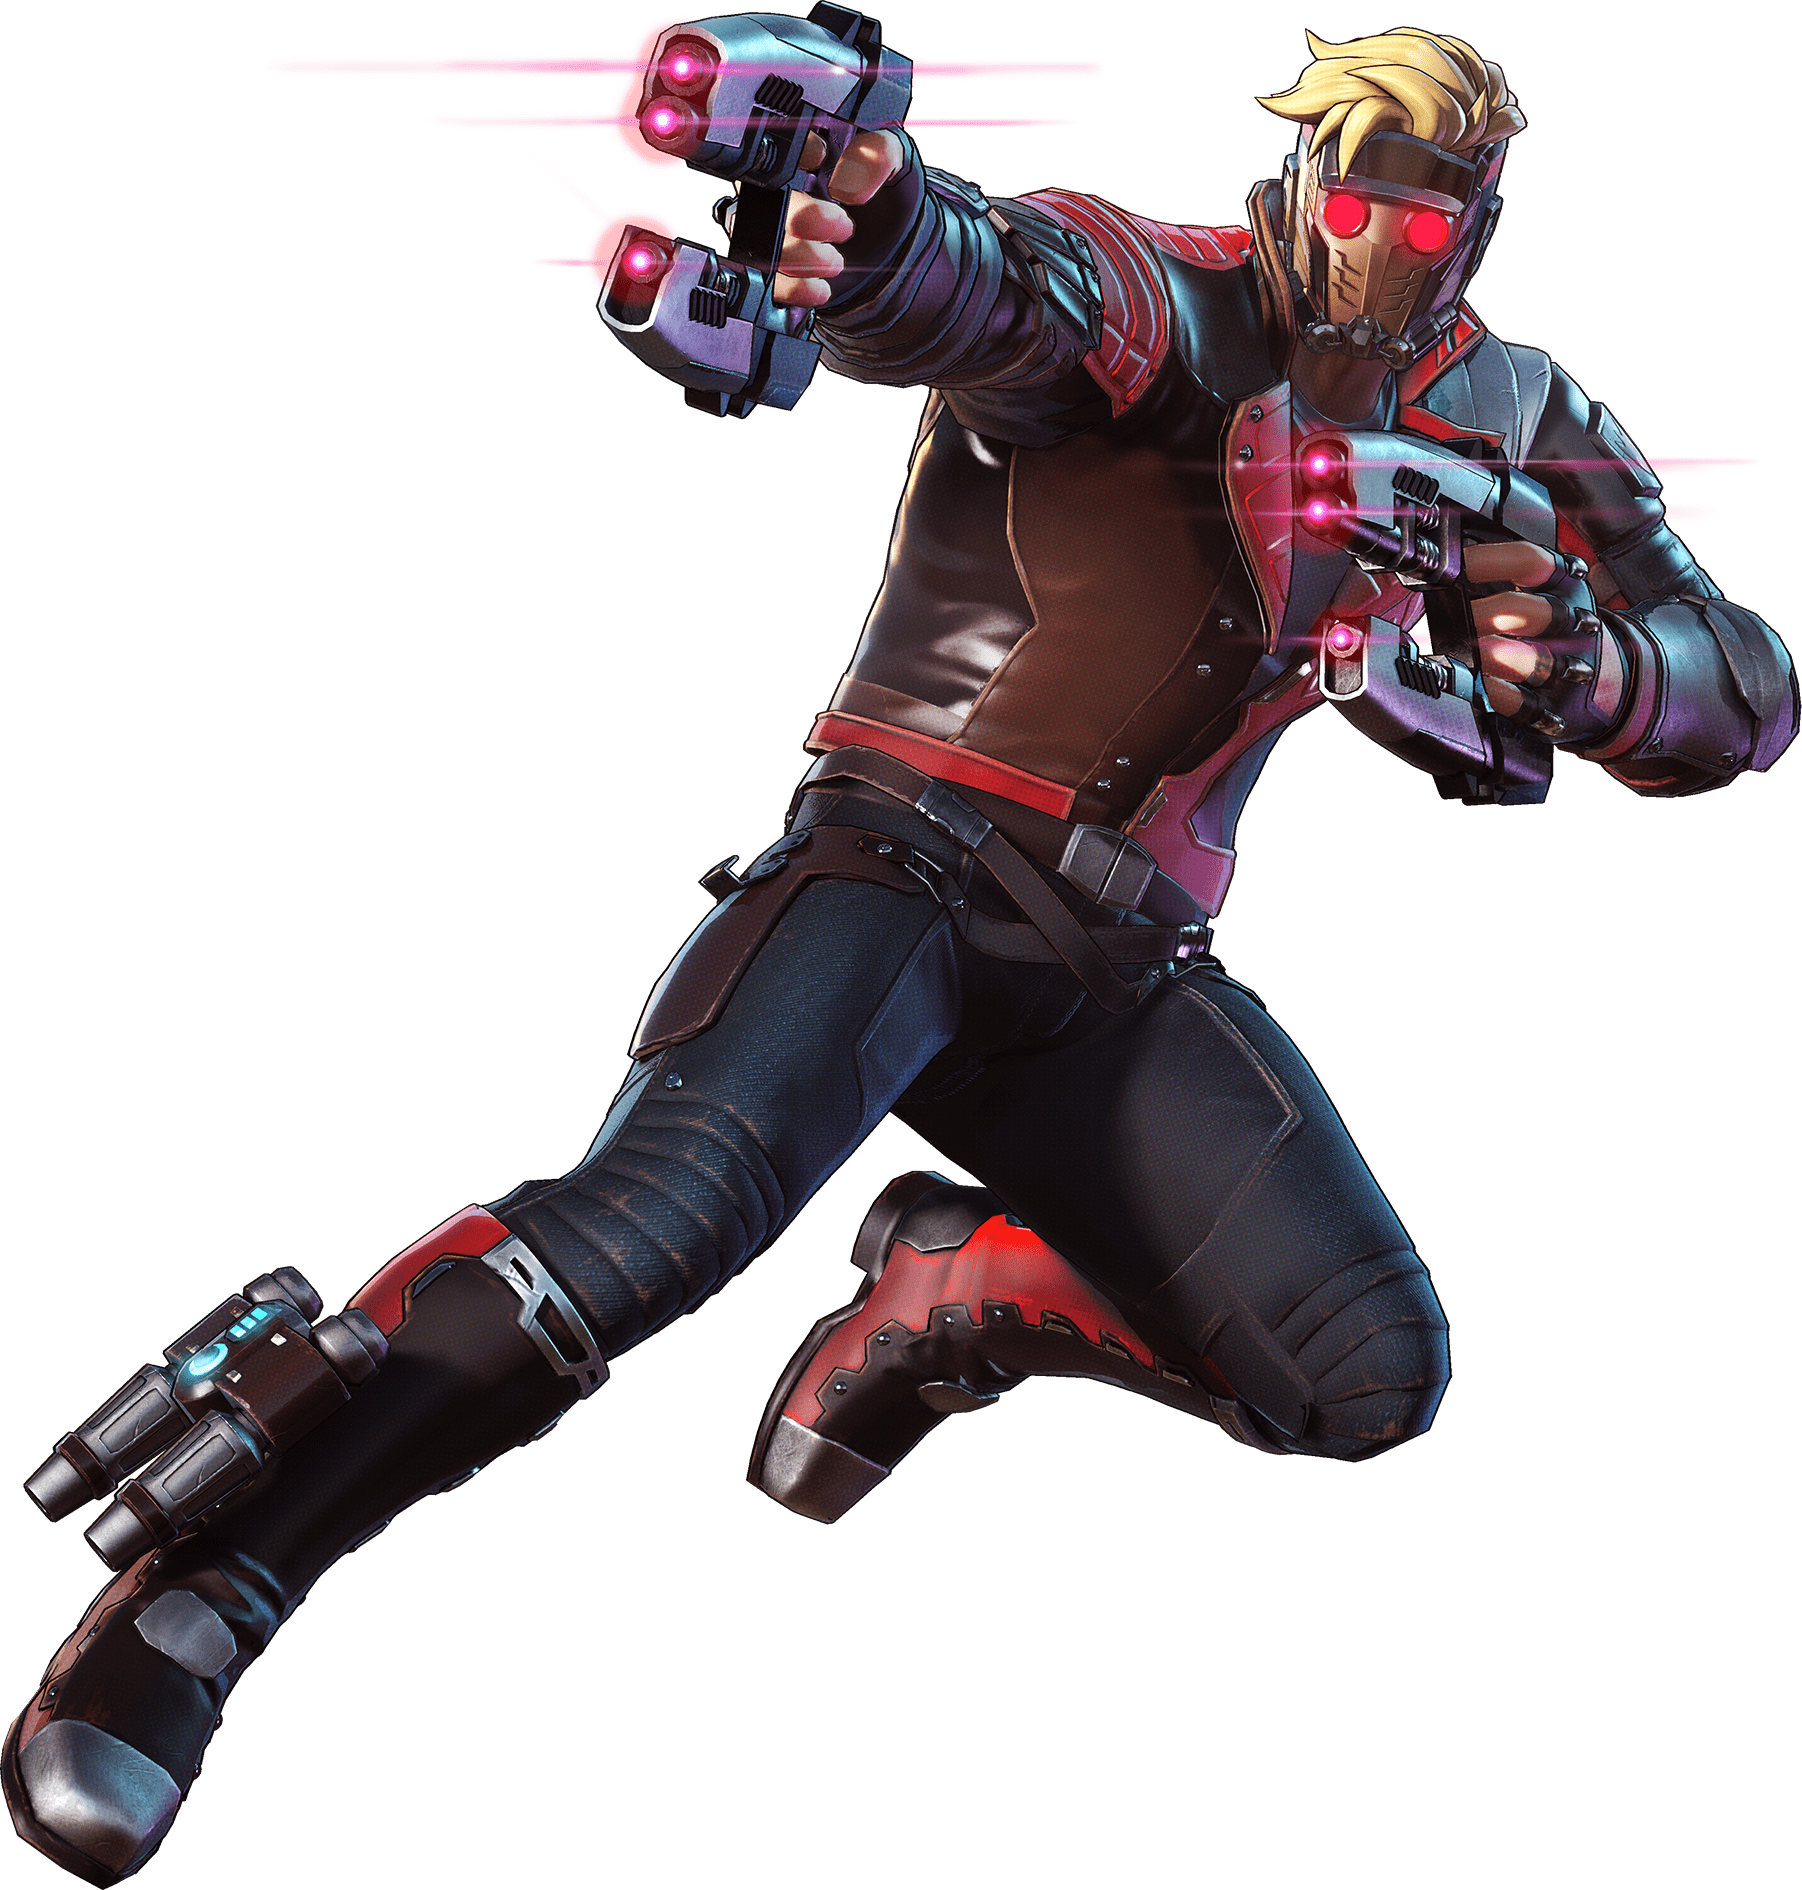 star lord blaster muzzle flash png